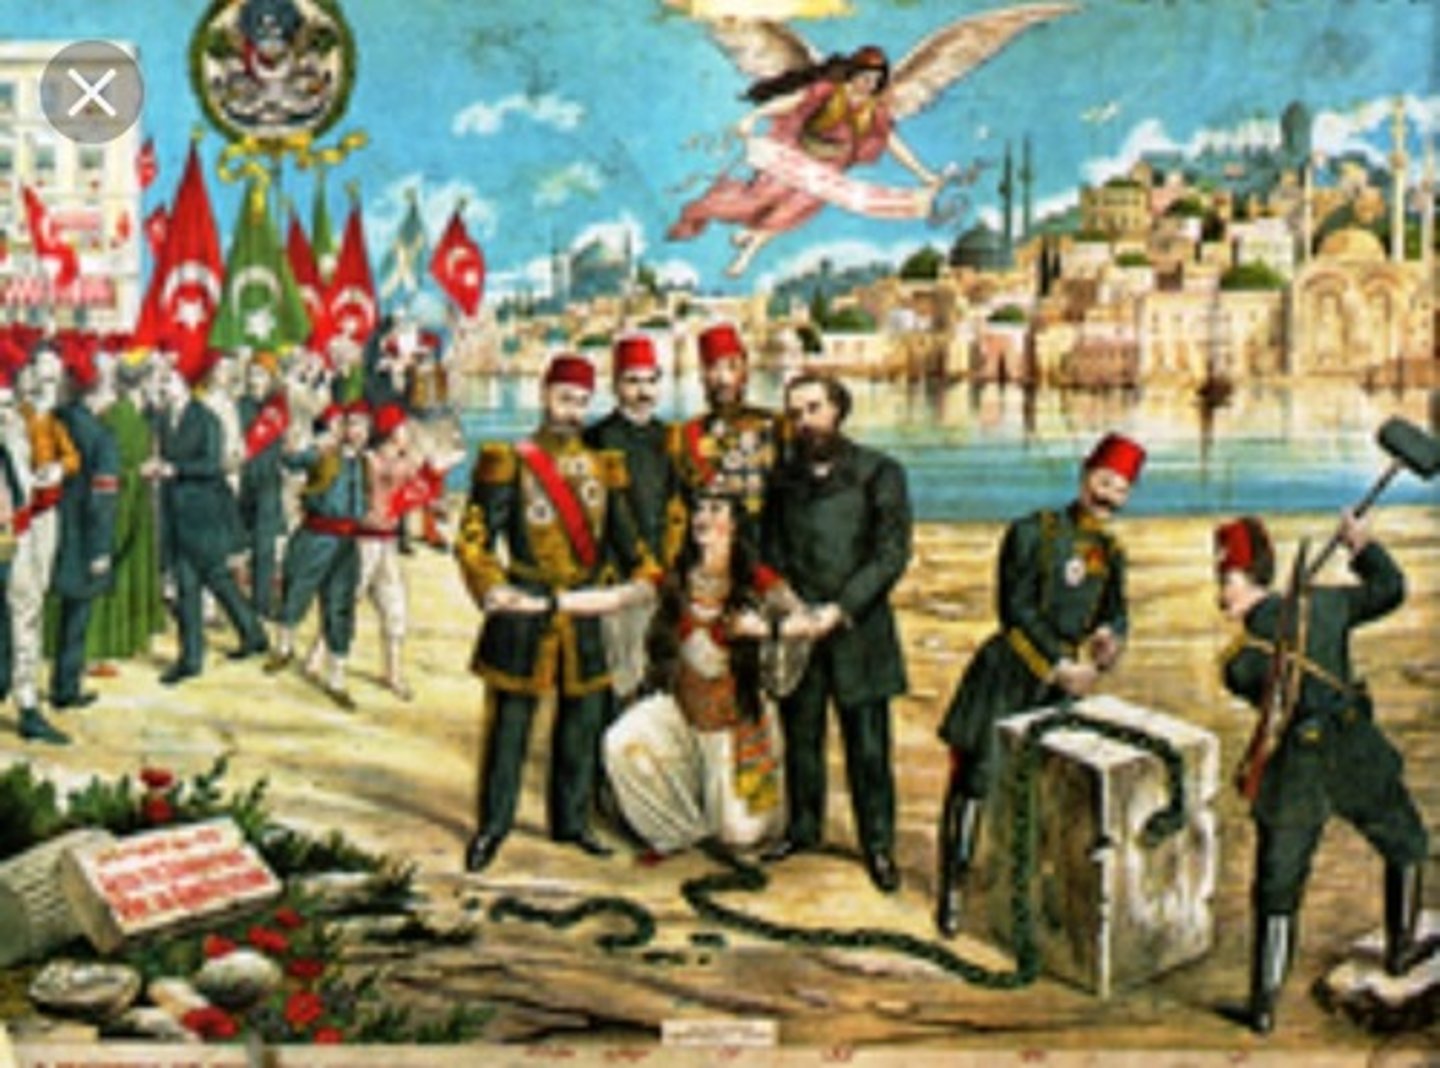 <p>Series of reforms in the Ottoman Empire between 1839 and 1876; established Western-style universities, state postal system, railways, extensive legal reforms; resulted in creation of new constitution in 1876</p>